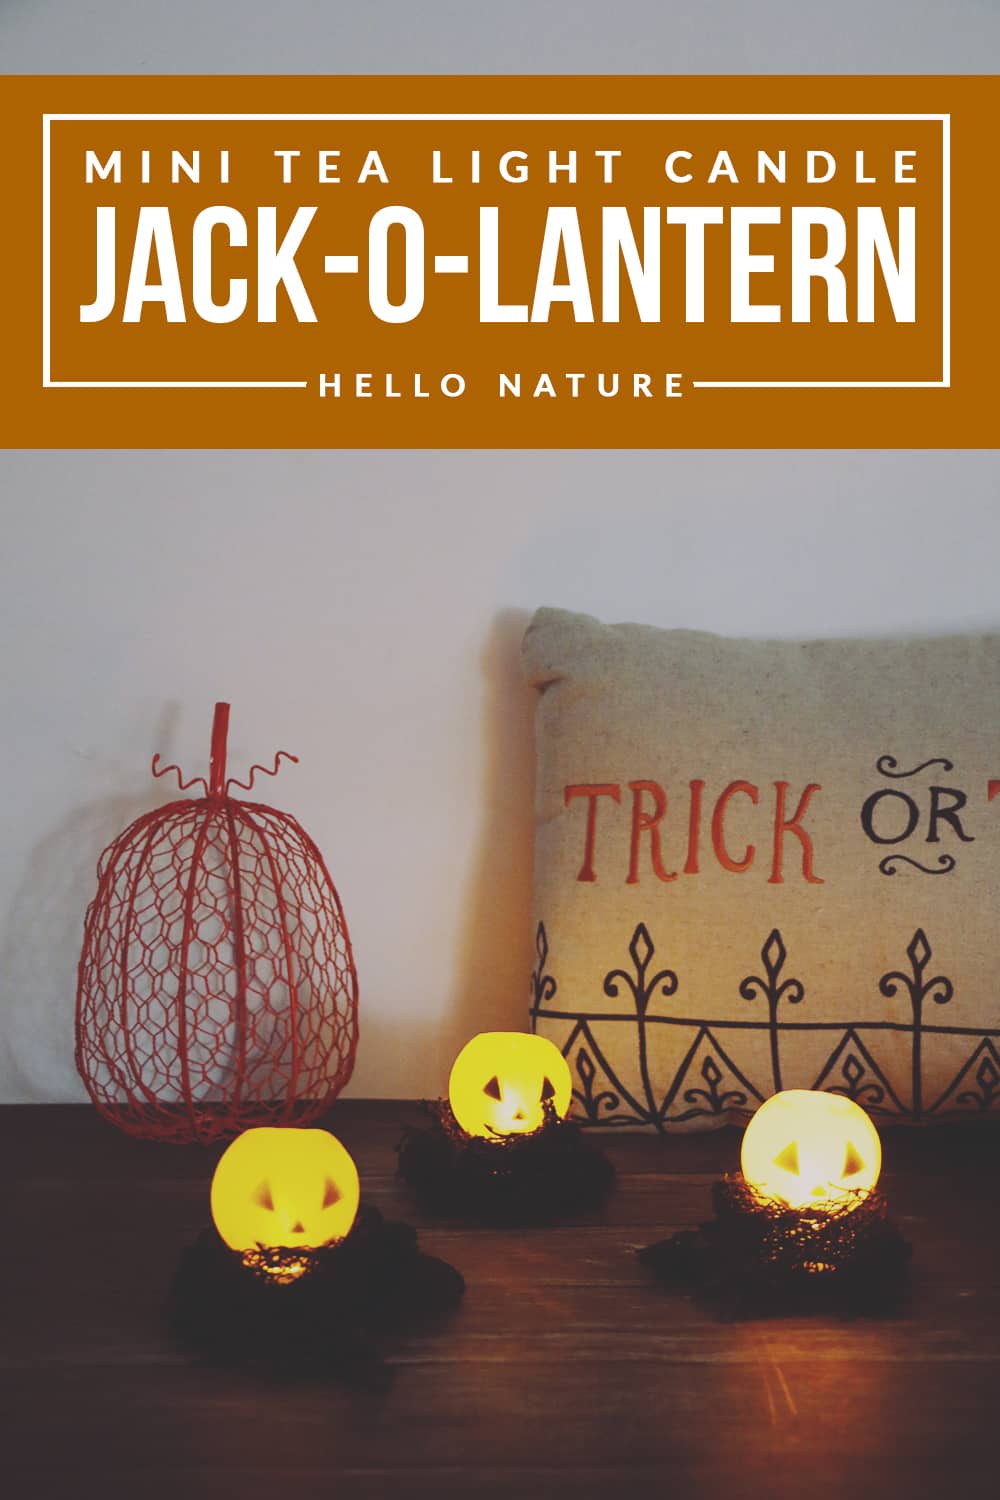 This easy to make Tea Light Jack-O-Lantern DIY is the perfect Halloween craft to add some extra spooky lighting and decor to your home!